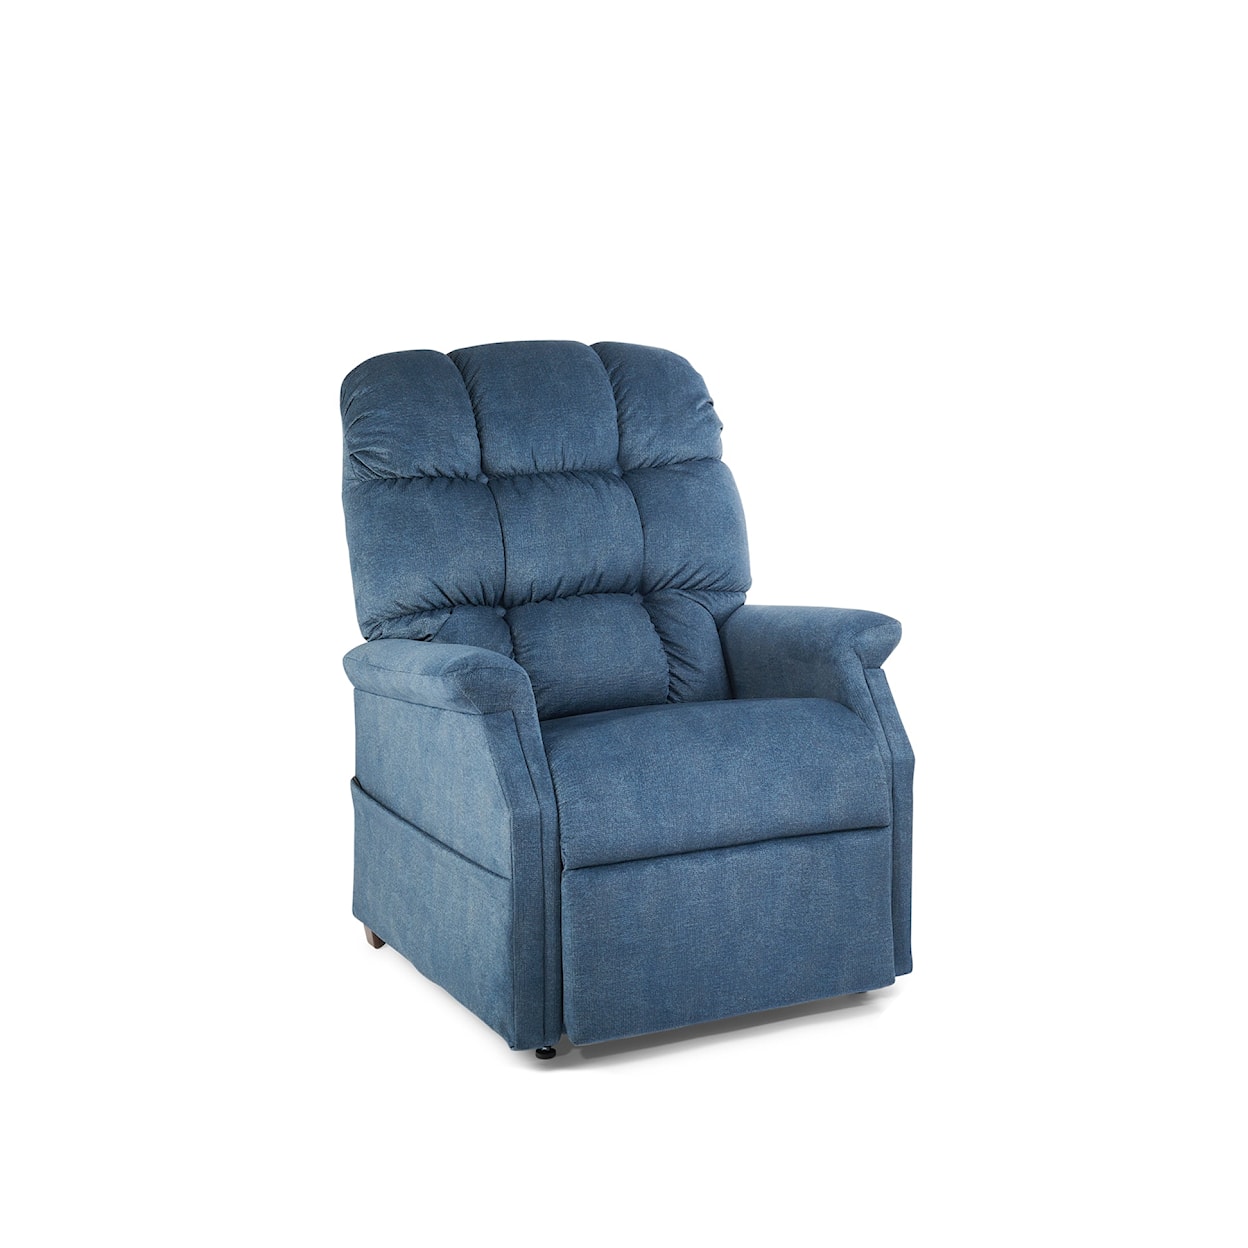 UltraComfort Aurora Lift Recliner with Heat and Massage